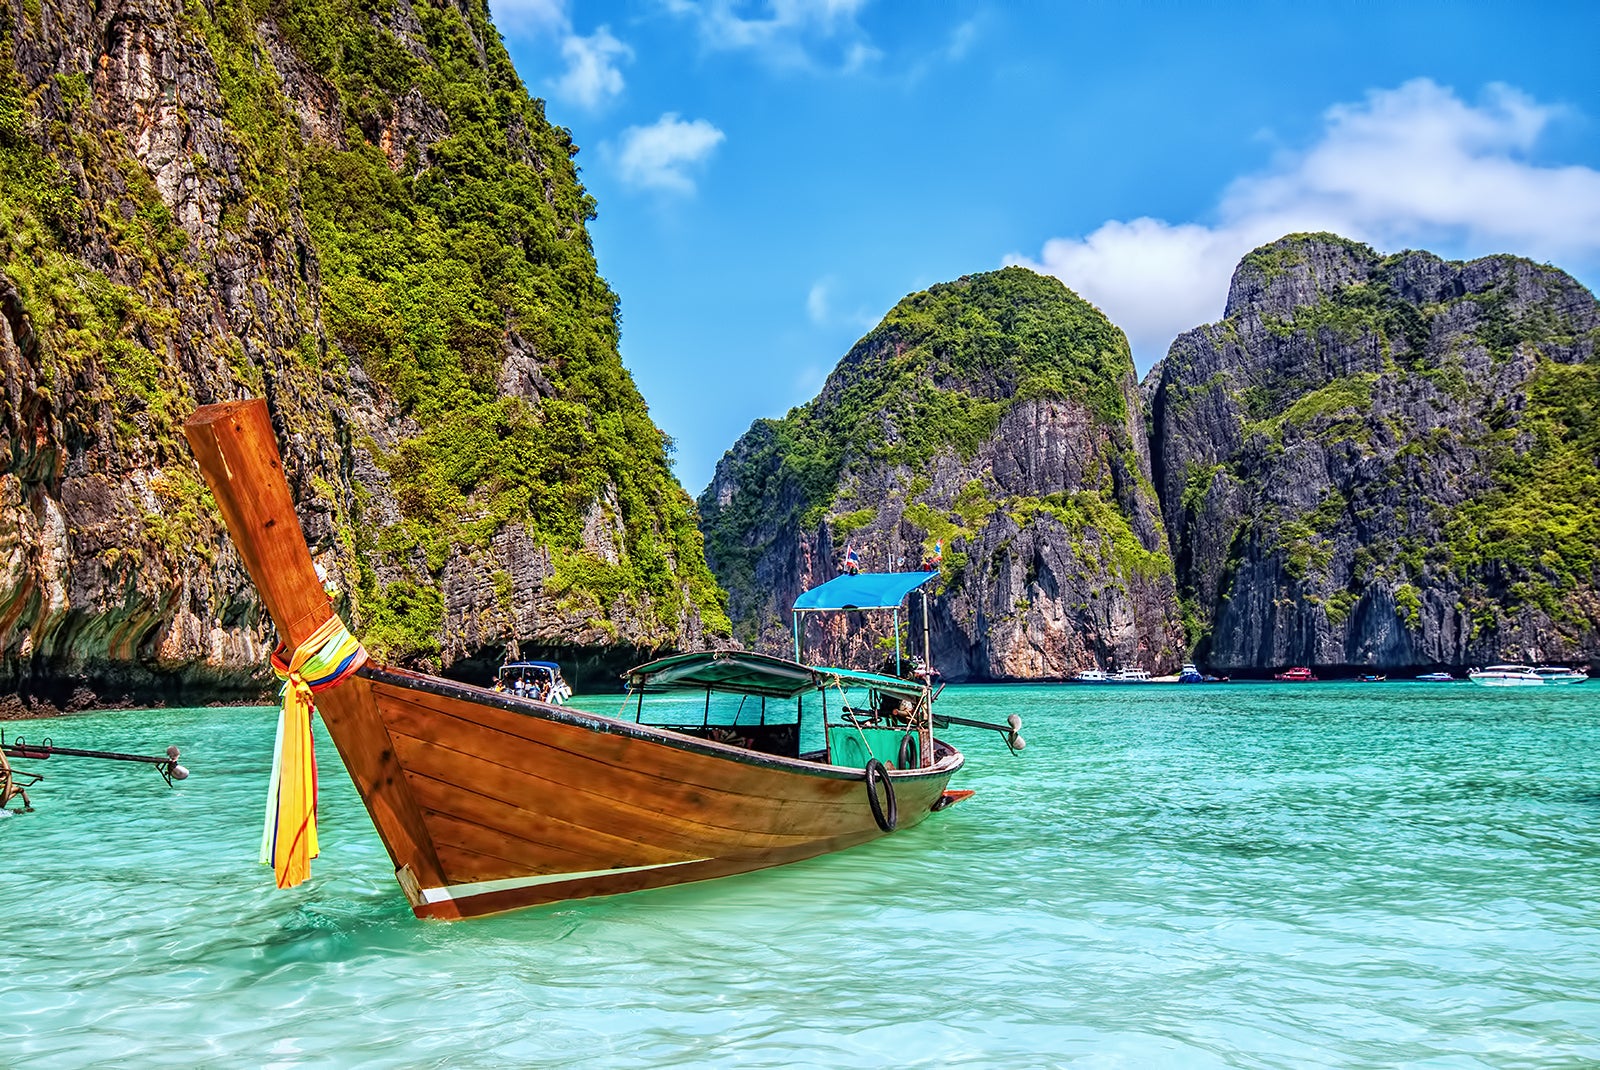 Let’s Give You Some Reasons to Plan Your Next Thailand Trip